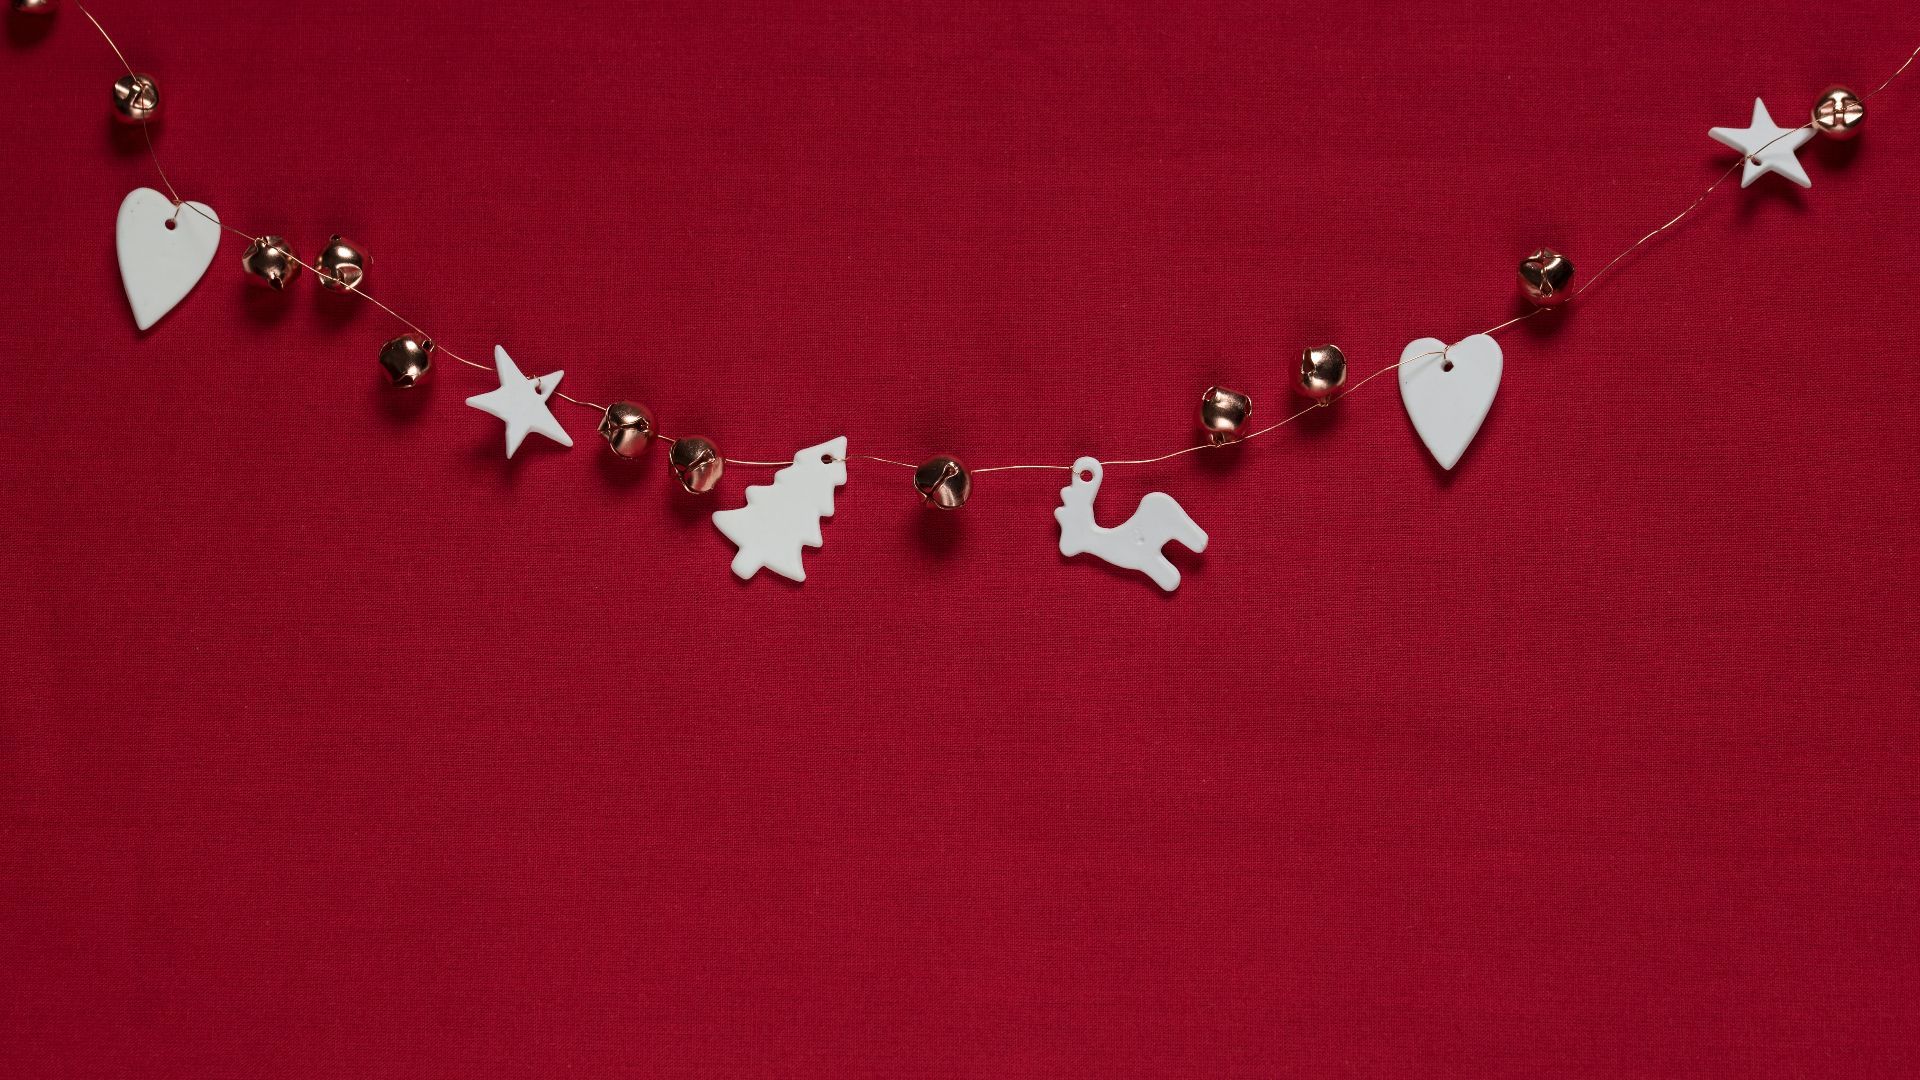 A string of Christmas decorations including stars, trees and deer on a red background - Cute Christmas